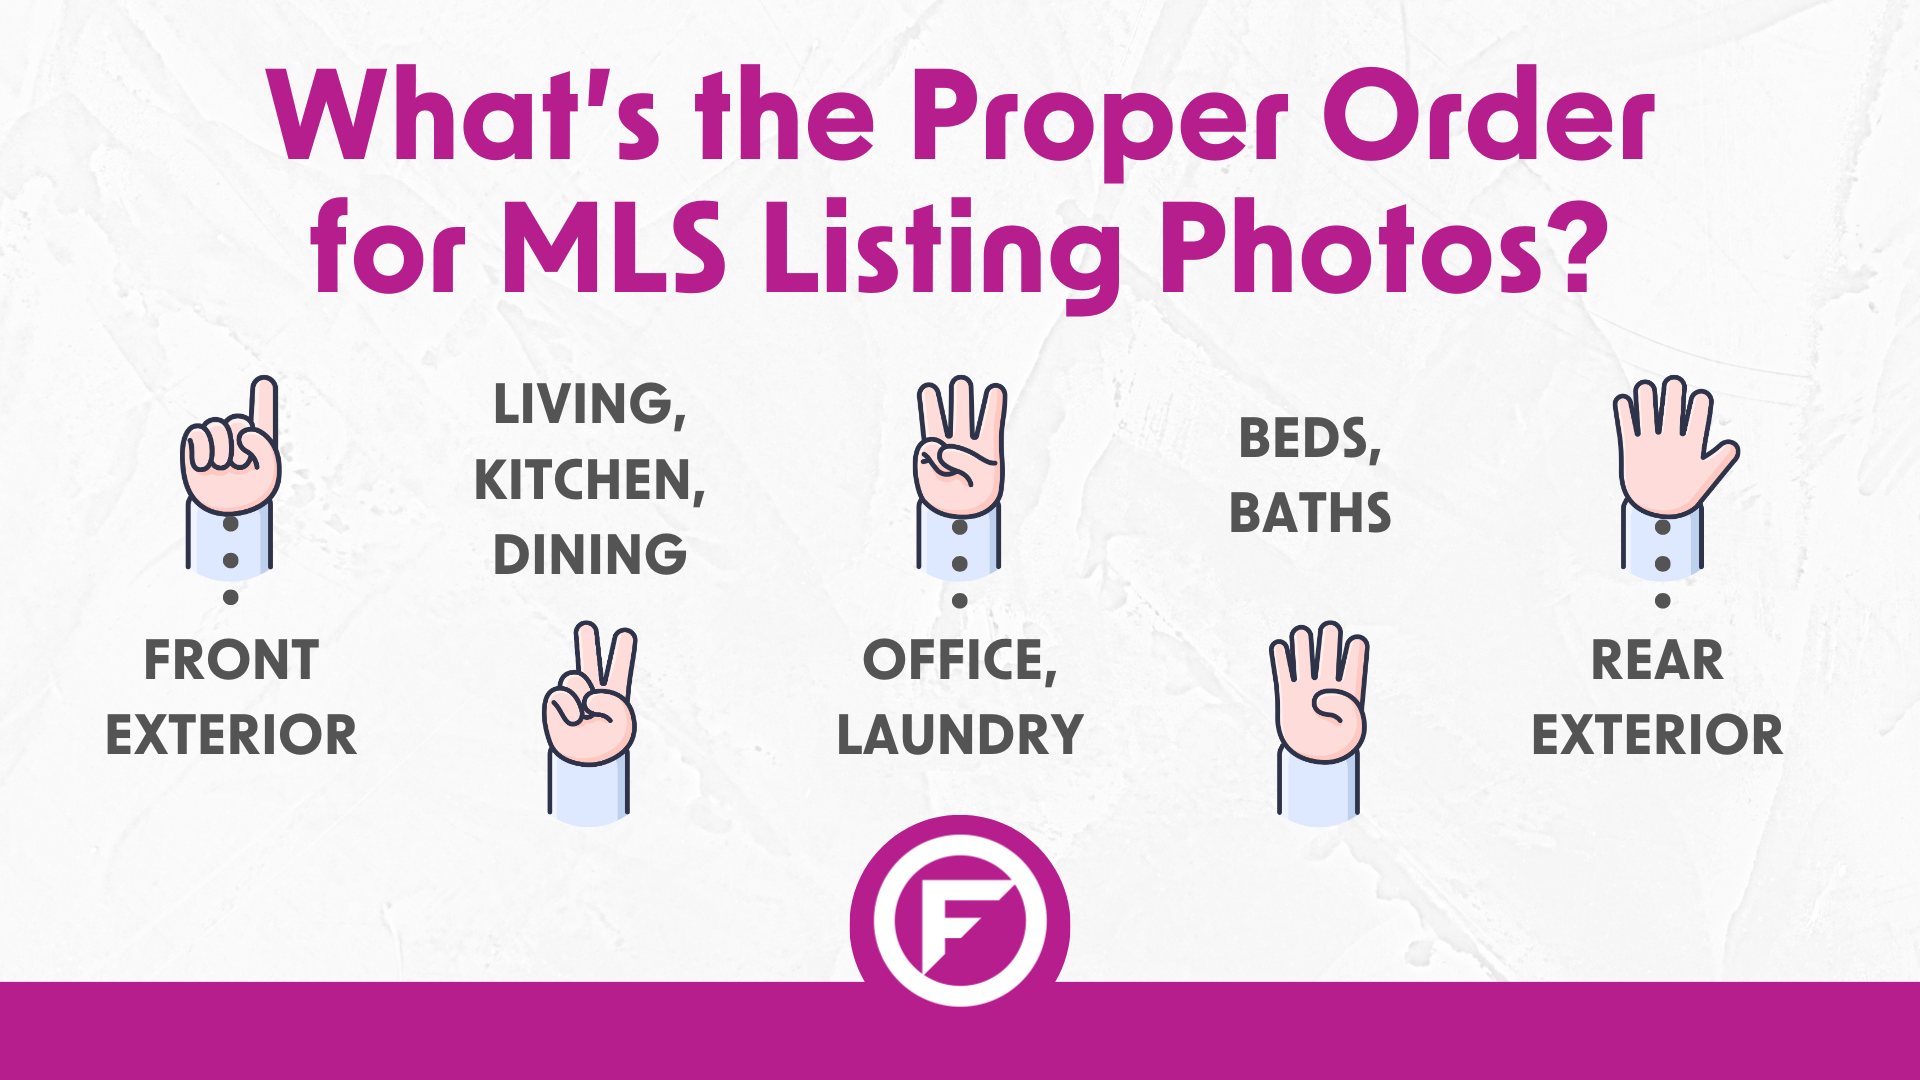 What's the Proper Order for MLS Listing Photos